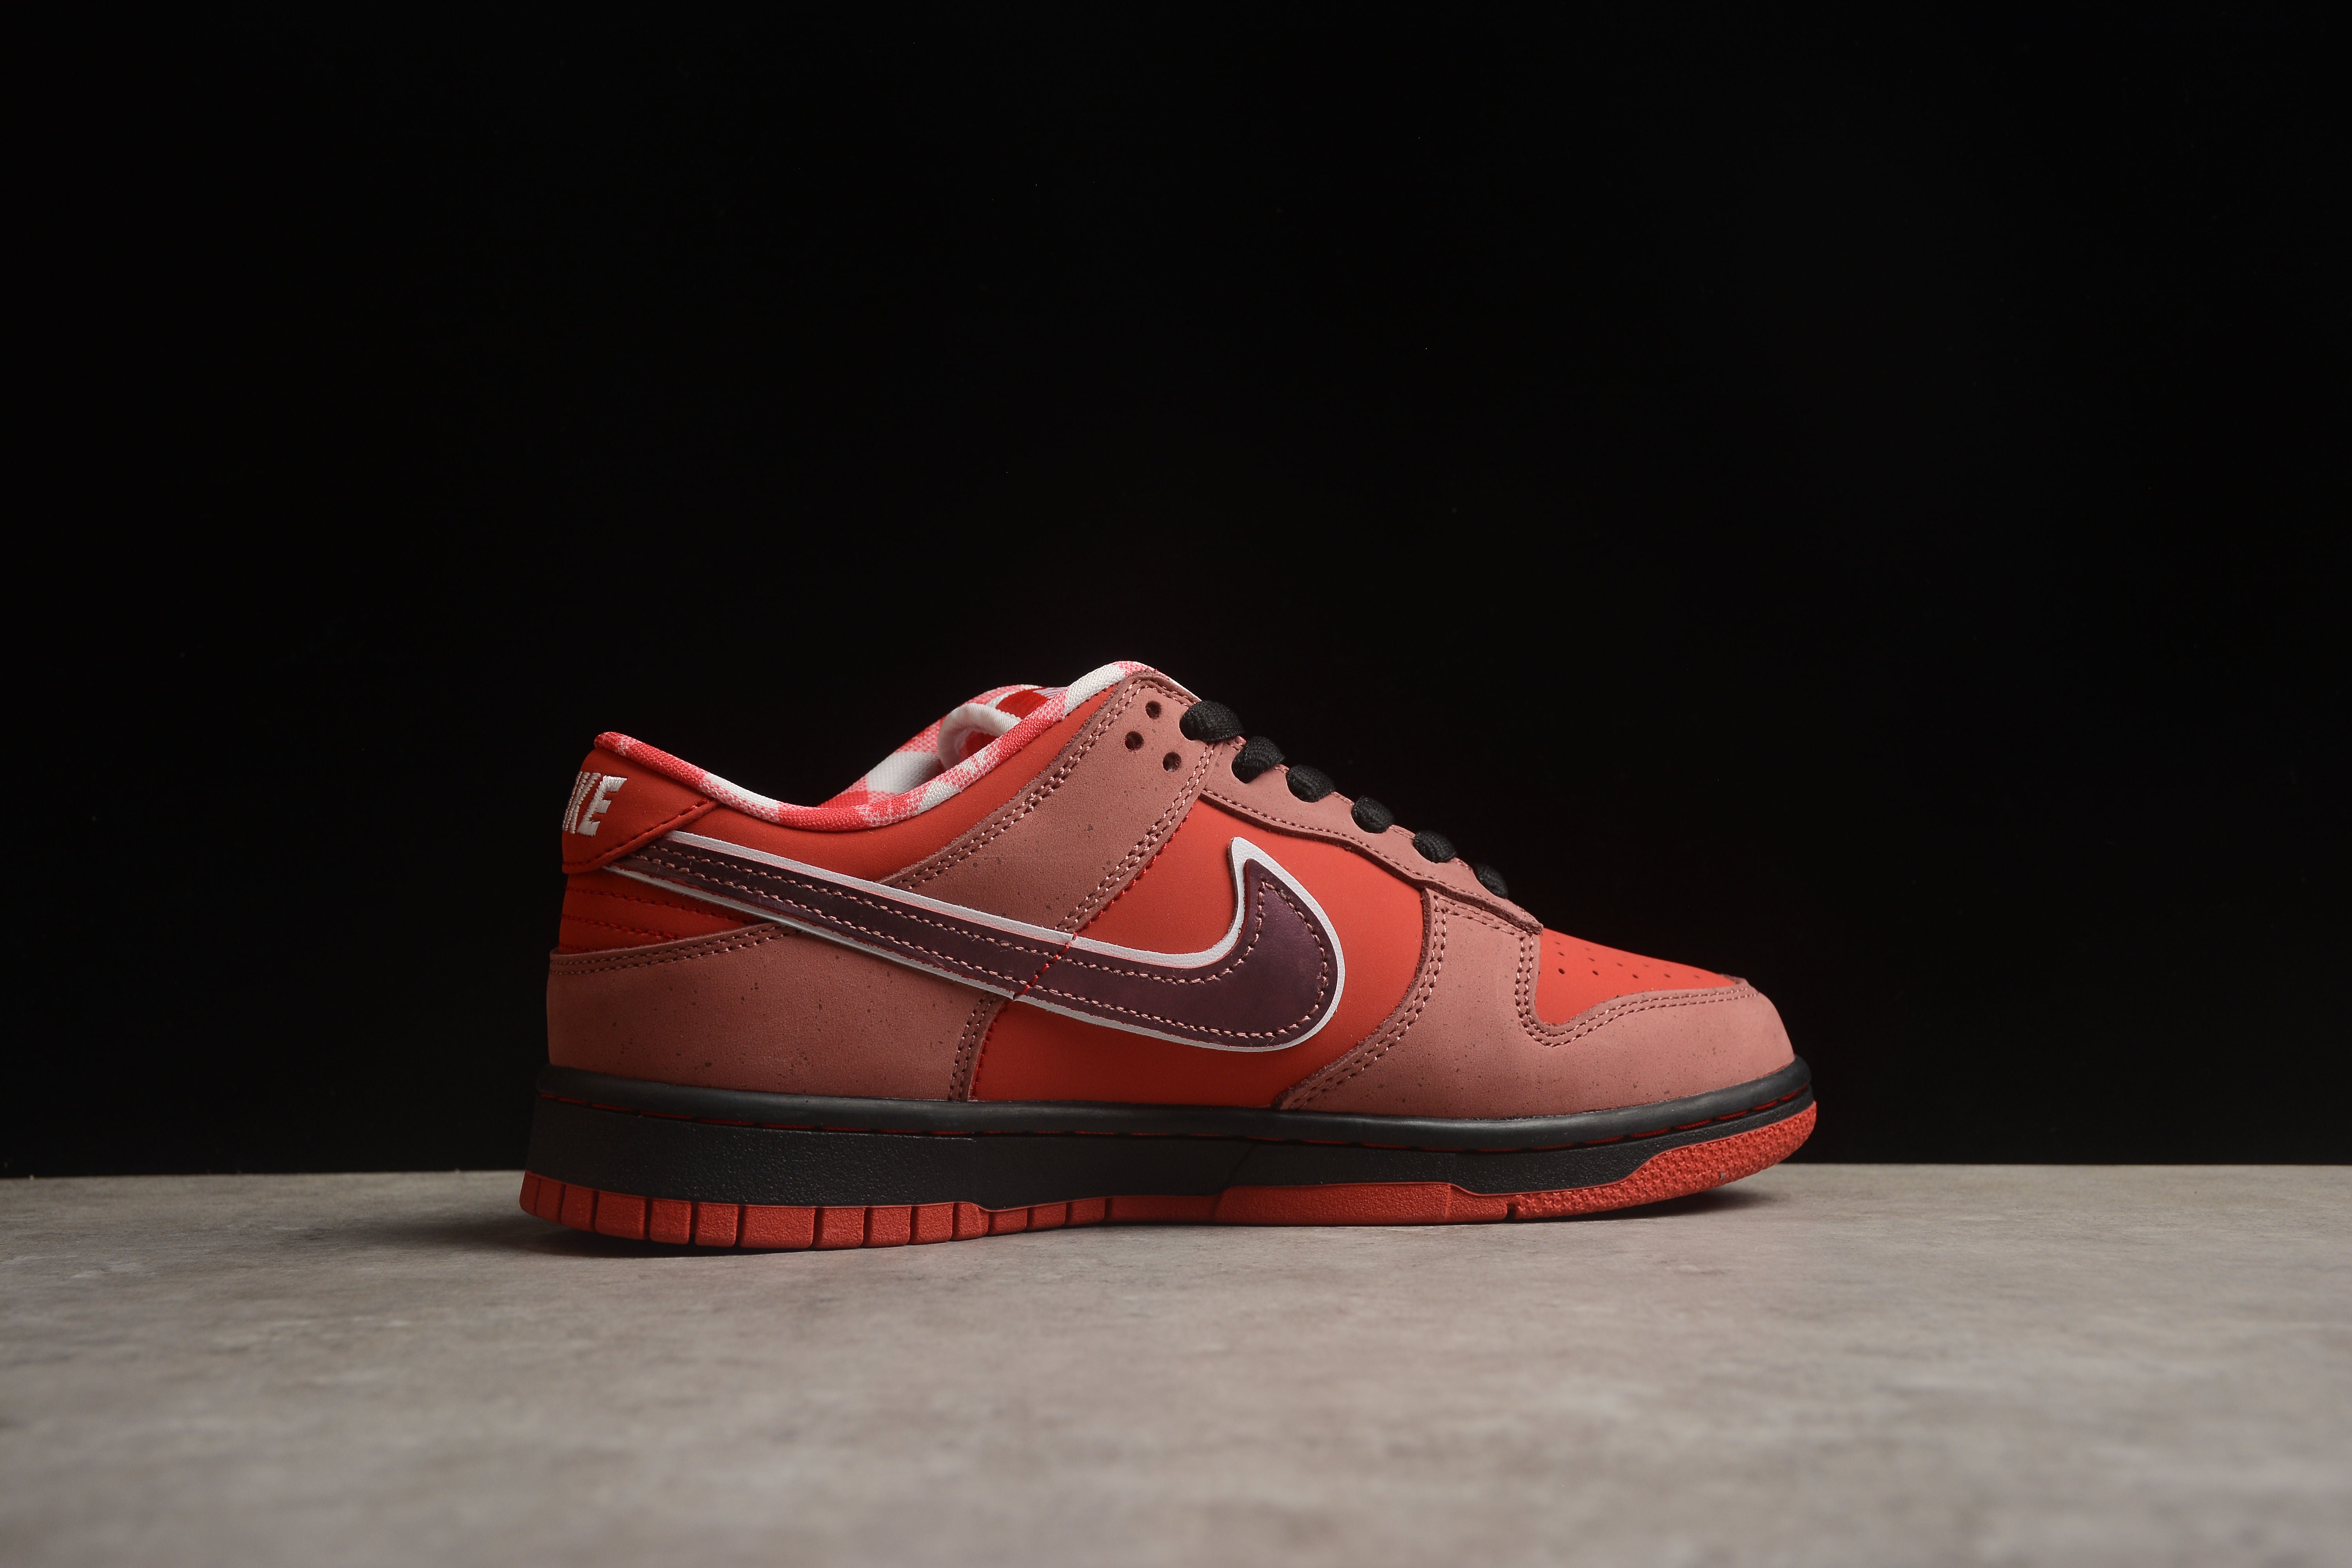 Nike SB dunk low red lobster shoes